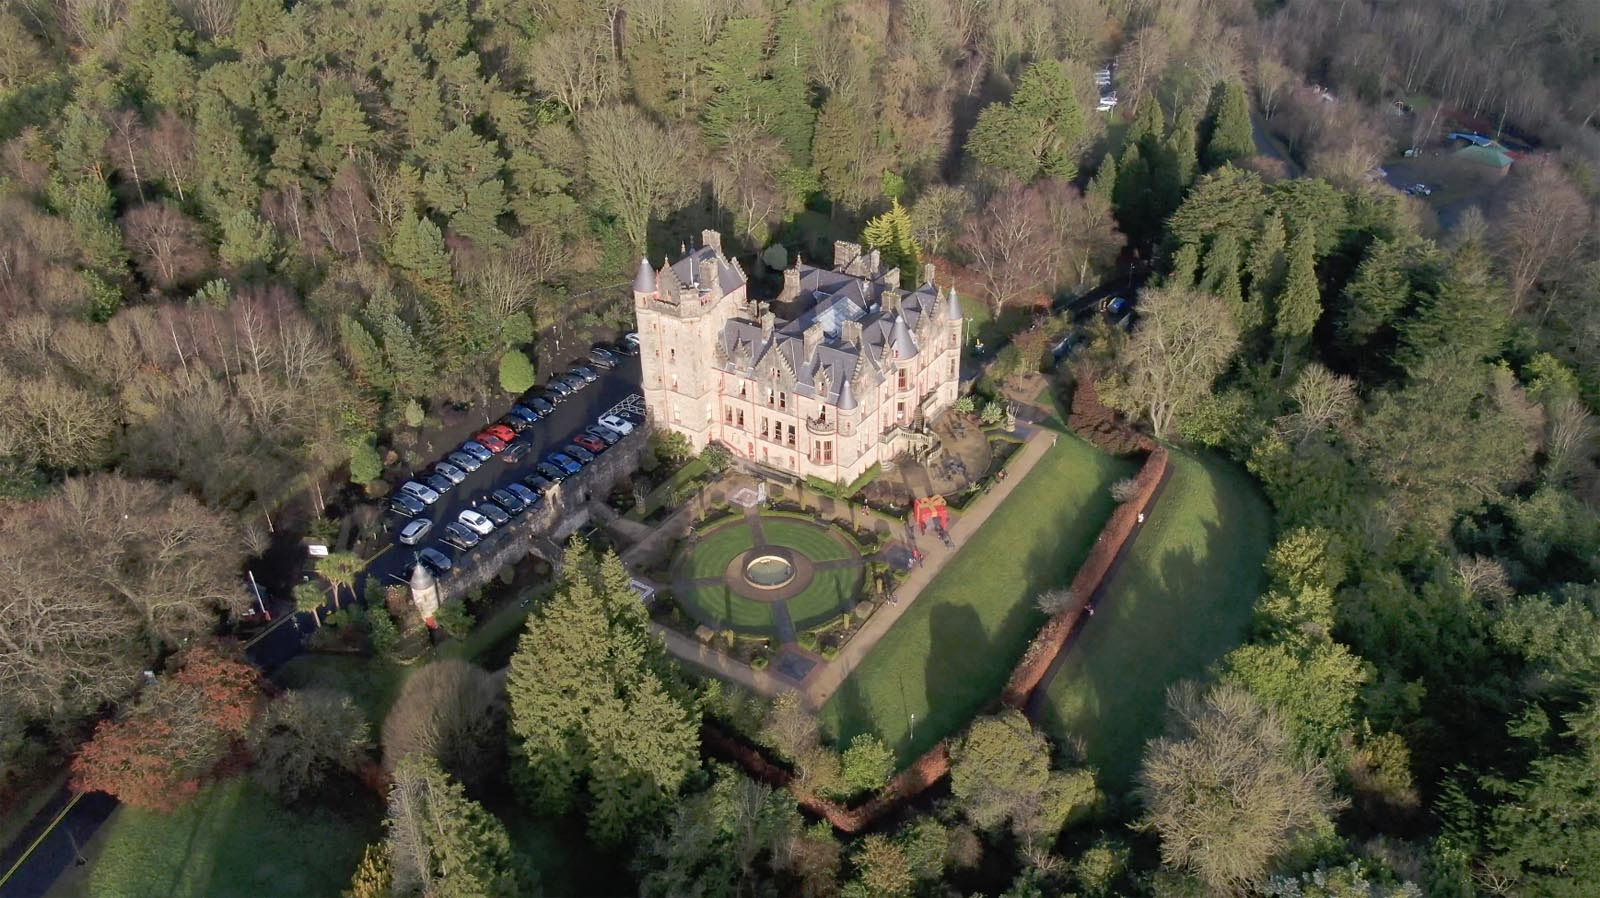 Aerial drone photography and video production services Dublin and Ireland portfolio - changing seasons in one video of Belfast Castle, Northern Ireland, video screenshot 1